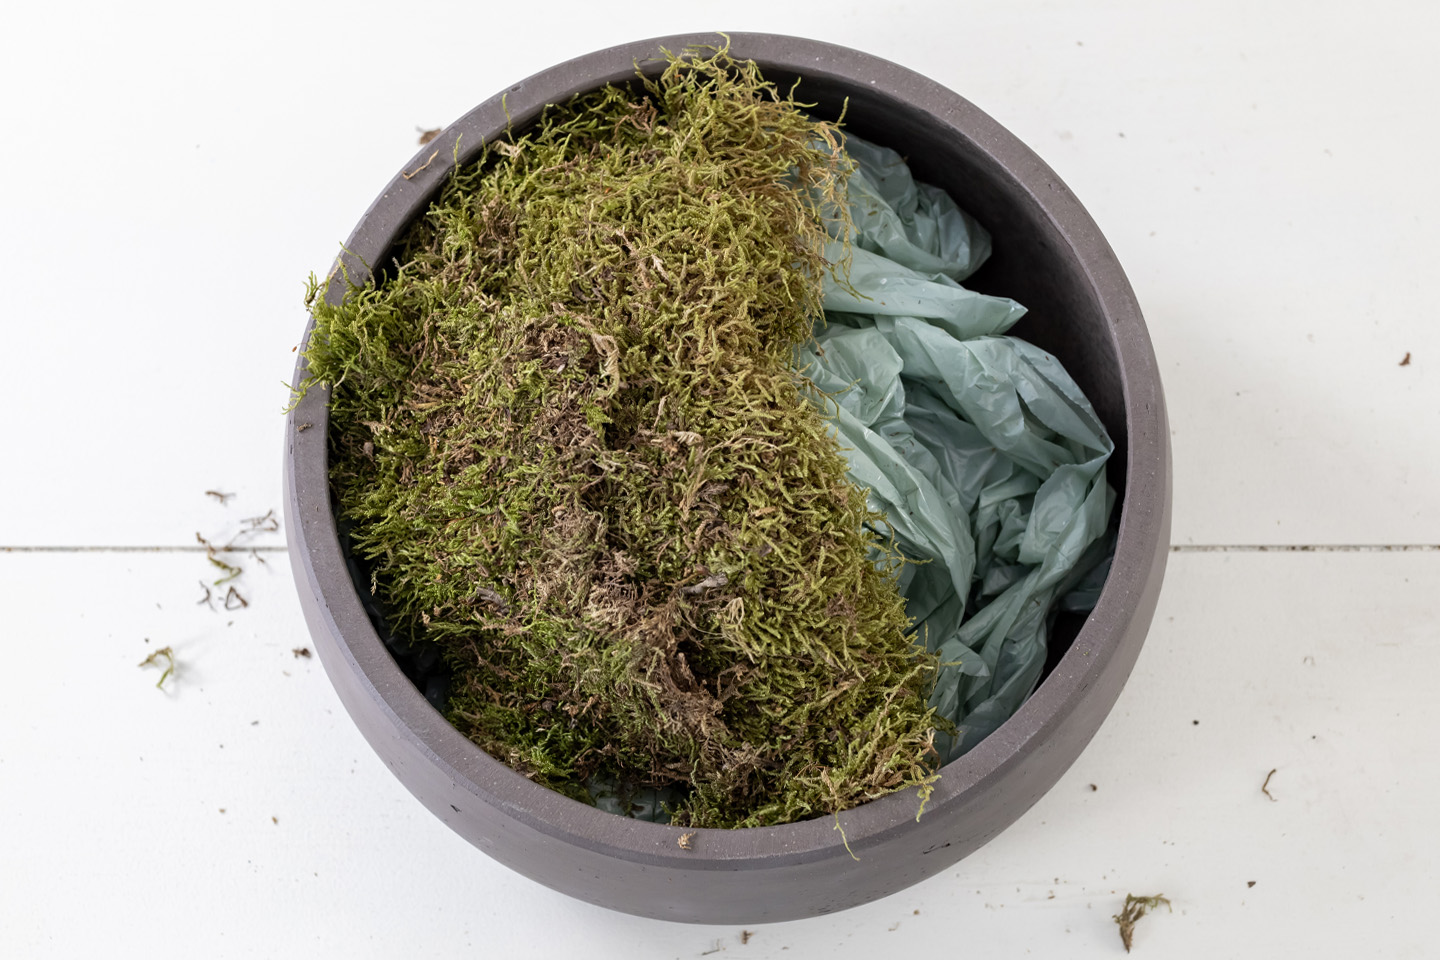 This moss bowl centerpiece makes a great addition to a coffee table, console, or on a shelf! It's easy to make, on-trend, and works well as an alternative to a plant if you have an area with low-light.